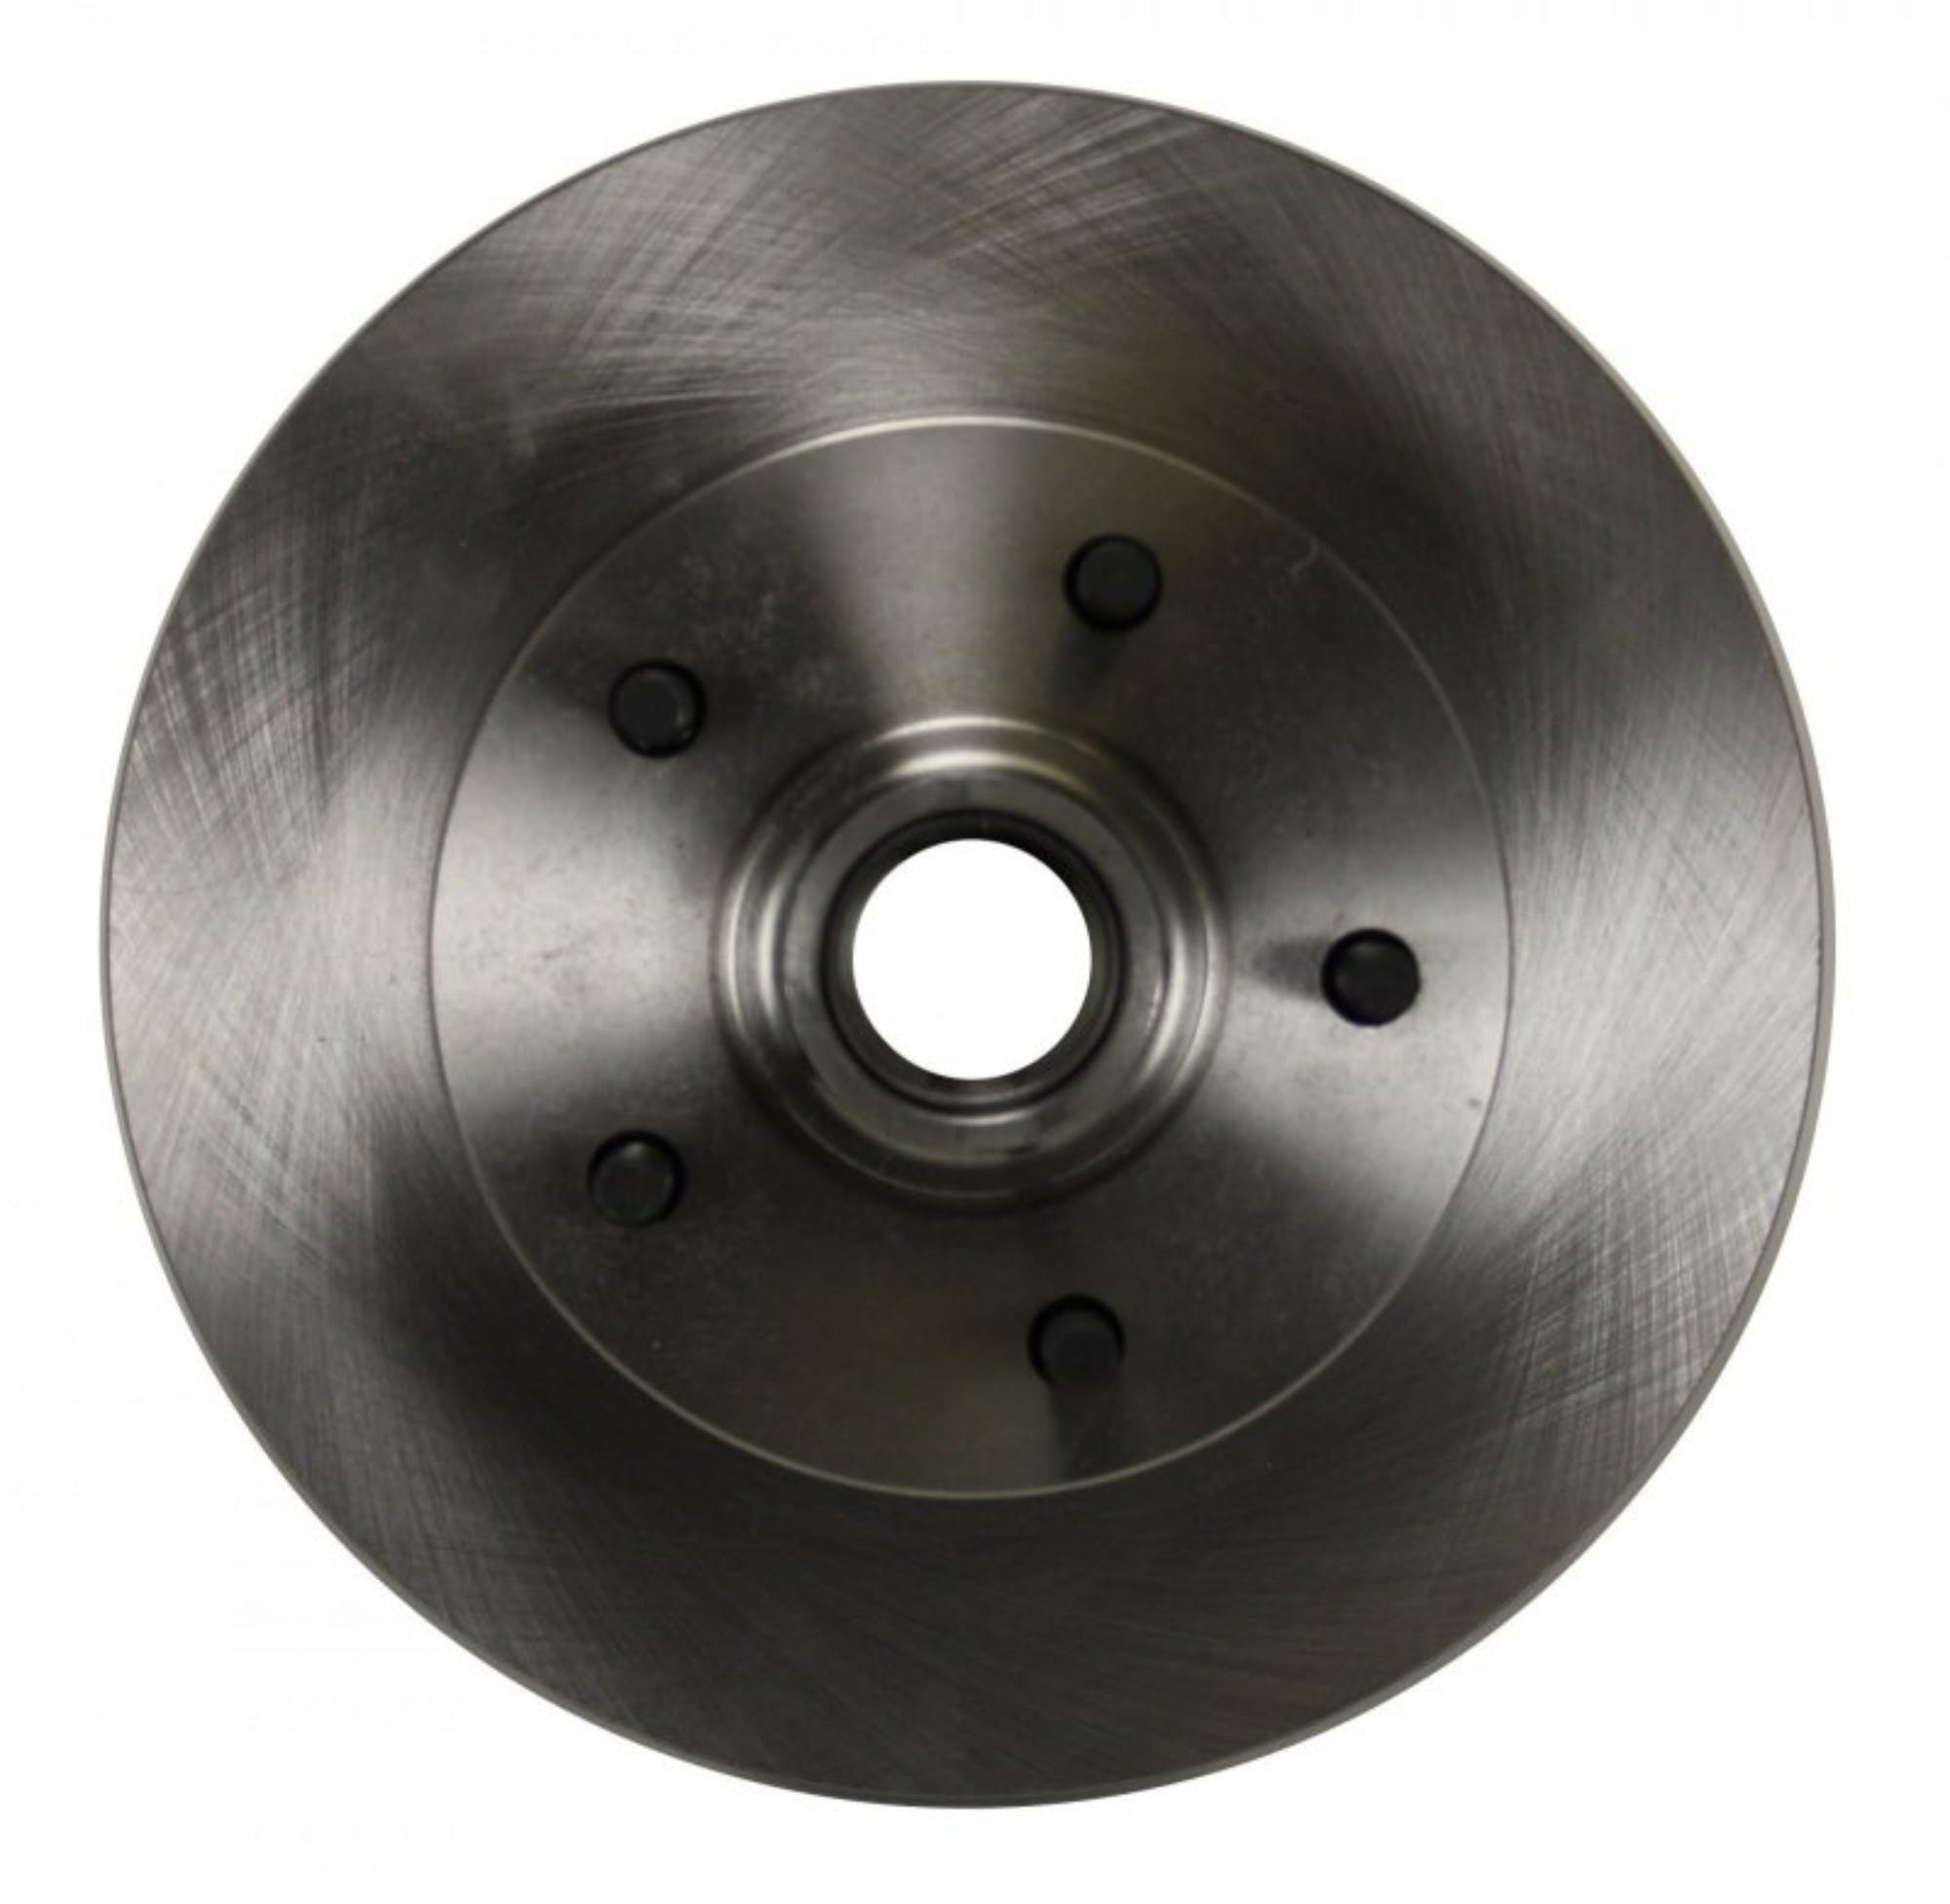 LEED Brakes FC1003-E1A3 Power Front Disc Kit - 9 in - Disc Disc - Zinc